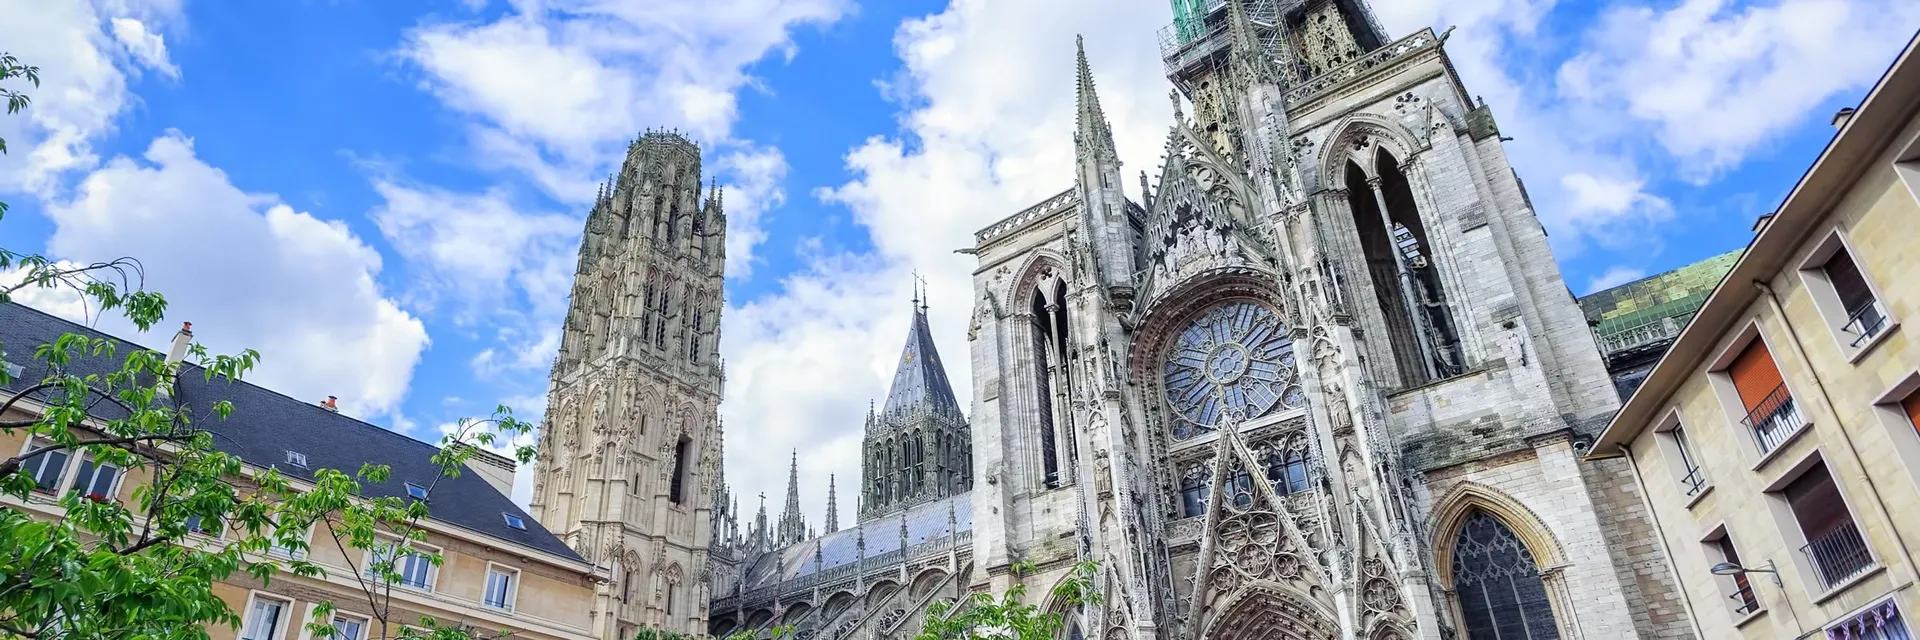 Rouen | Normandy Region, France - Rated 6.1